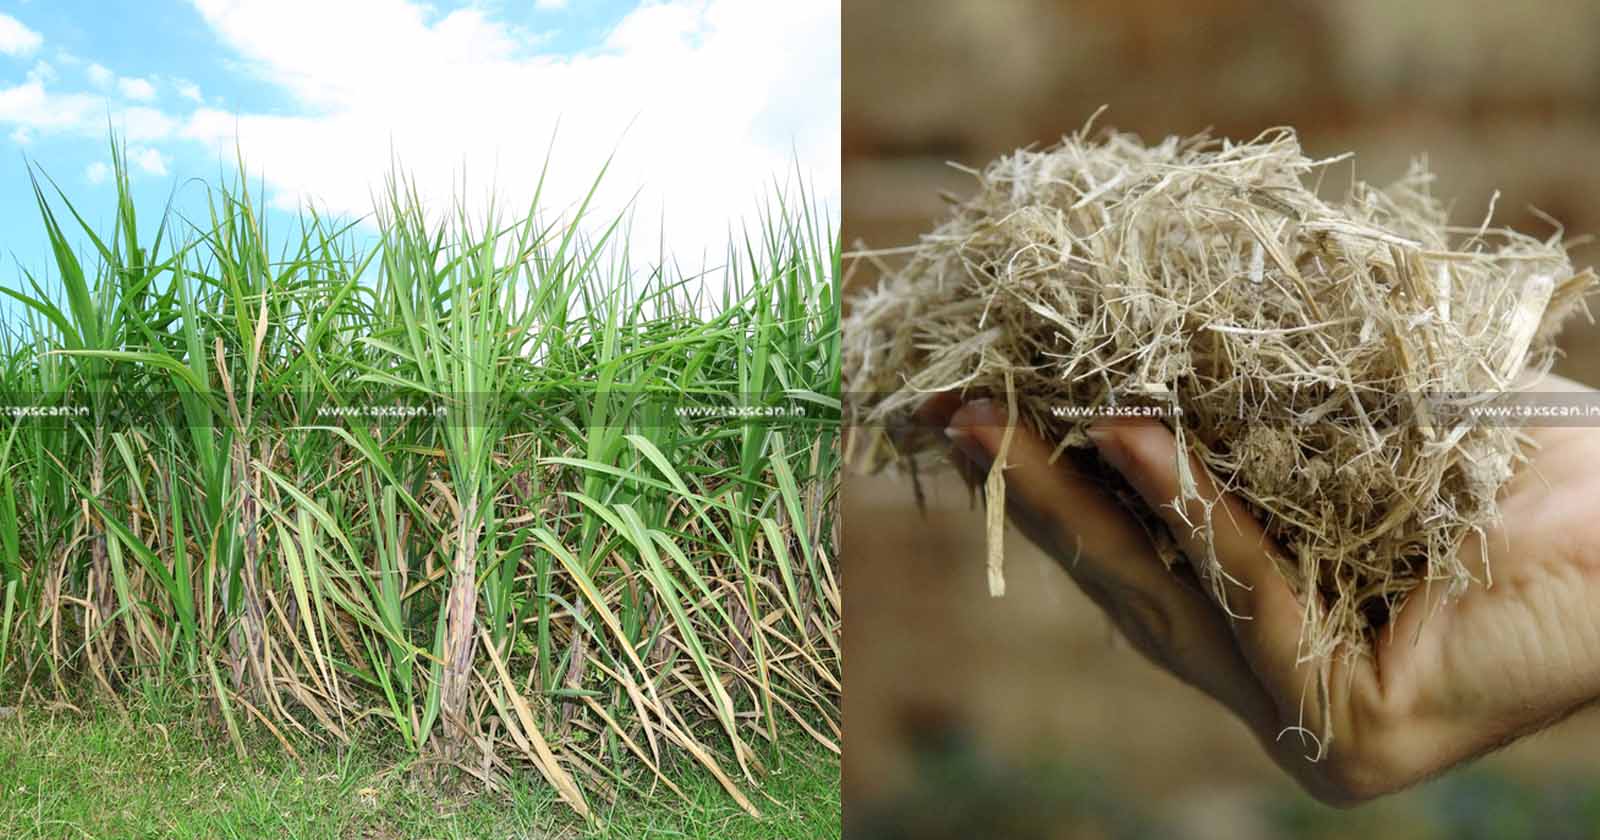 Bagasse is an Agricultural Waste Not a Manufactured Product - CESTAT sets aside Demand of Excise Duty - CESTAT - Demand of Excise Duty - Bagasse - Taxscan